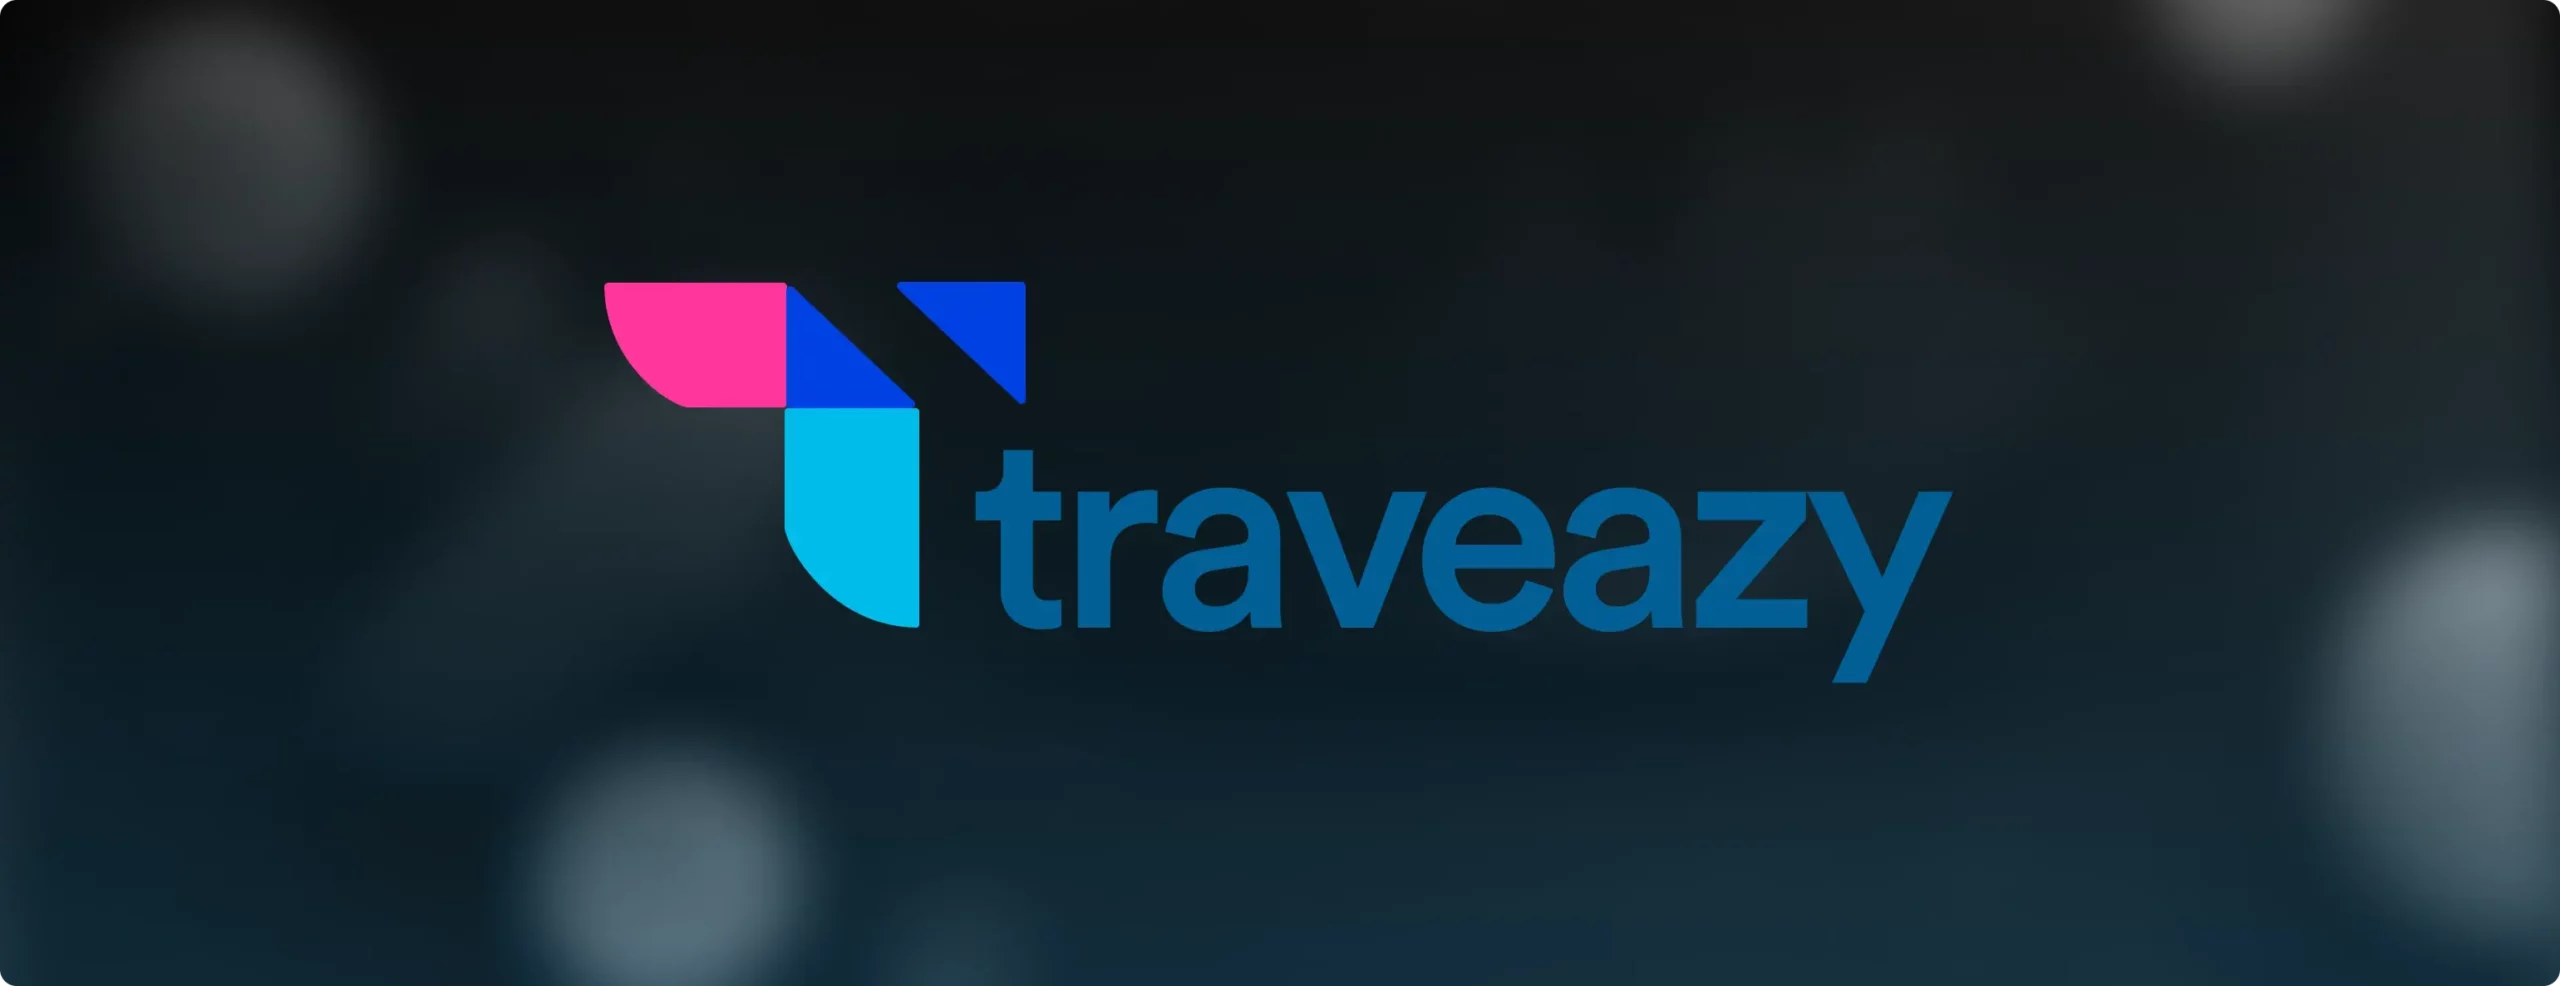 How Traveazy a Travel Tech Player Reduced their Development Time by 75% with DronaHQ